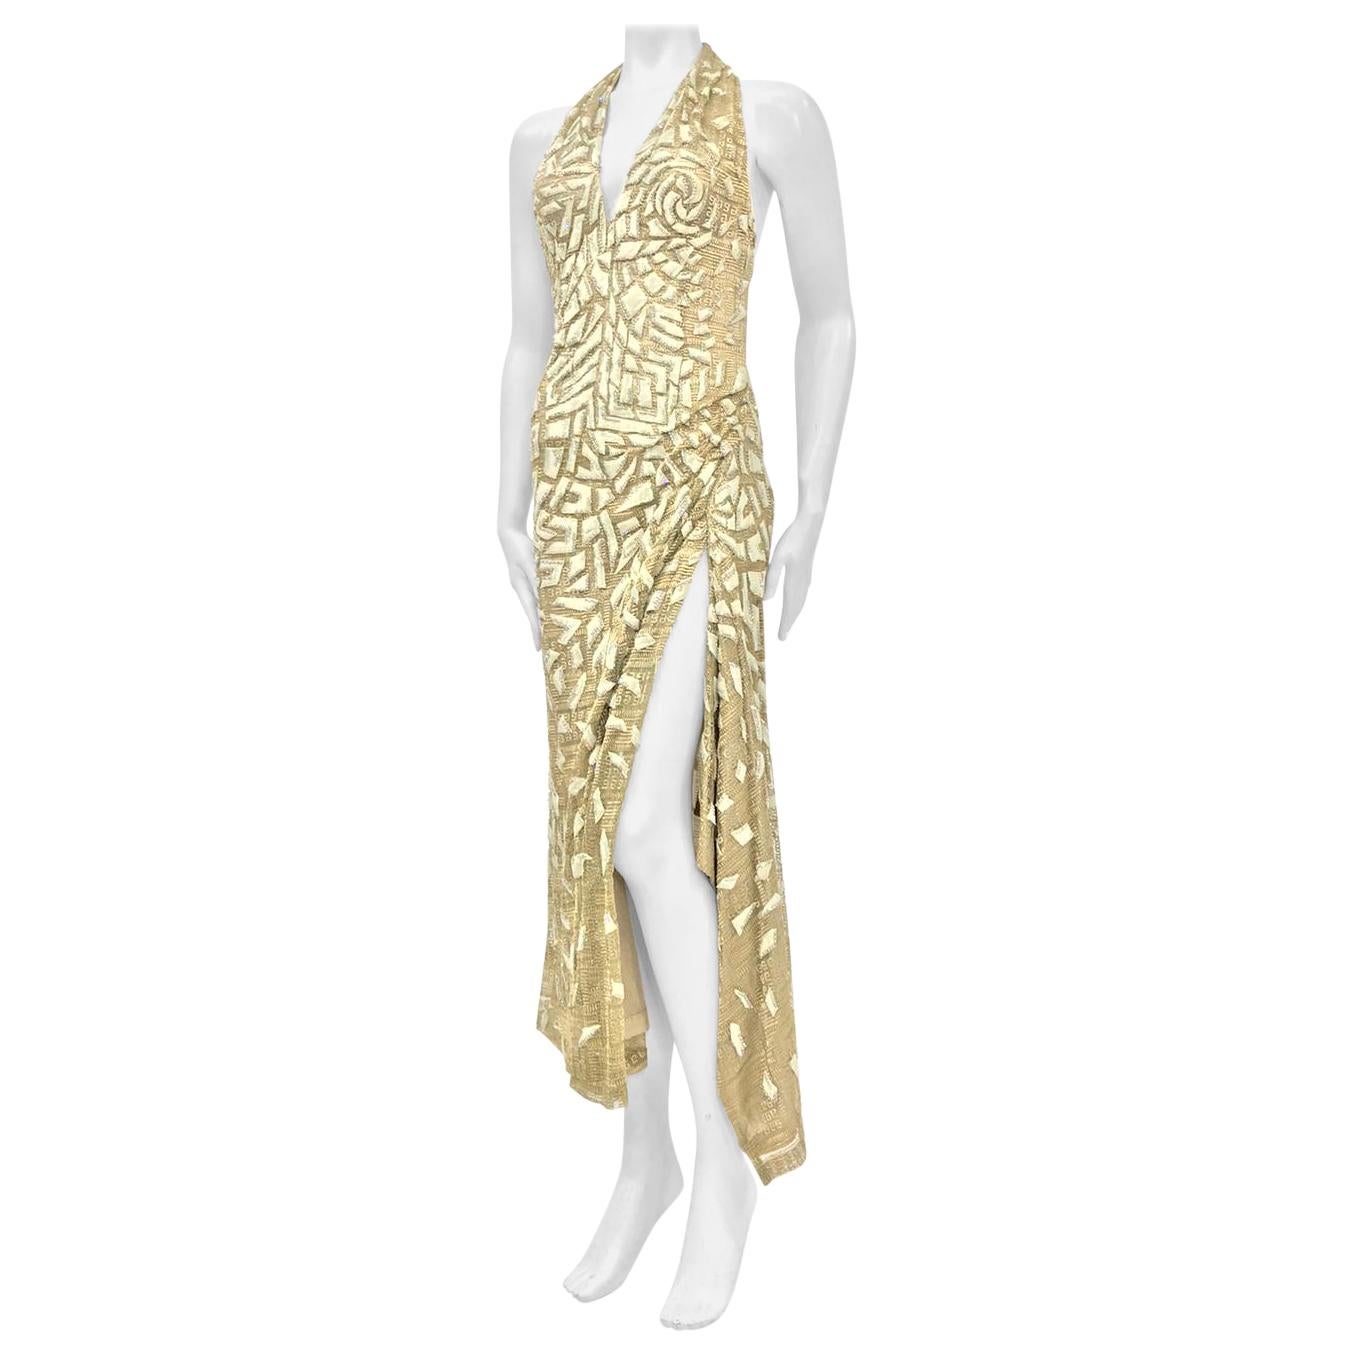 1990'S GIANNI VERSACE ATELIÉR Metallic Gold Lamé Lace Gown Covered In Crystals 